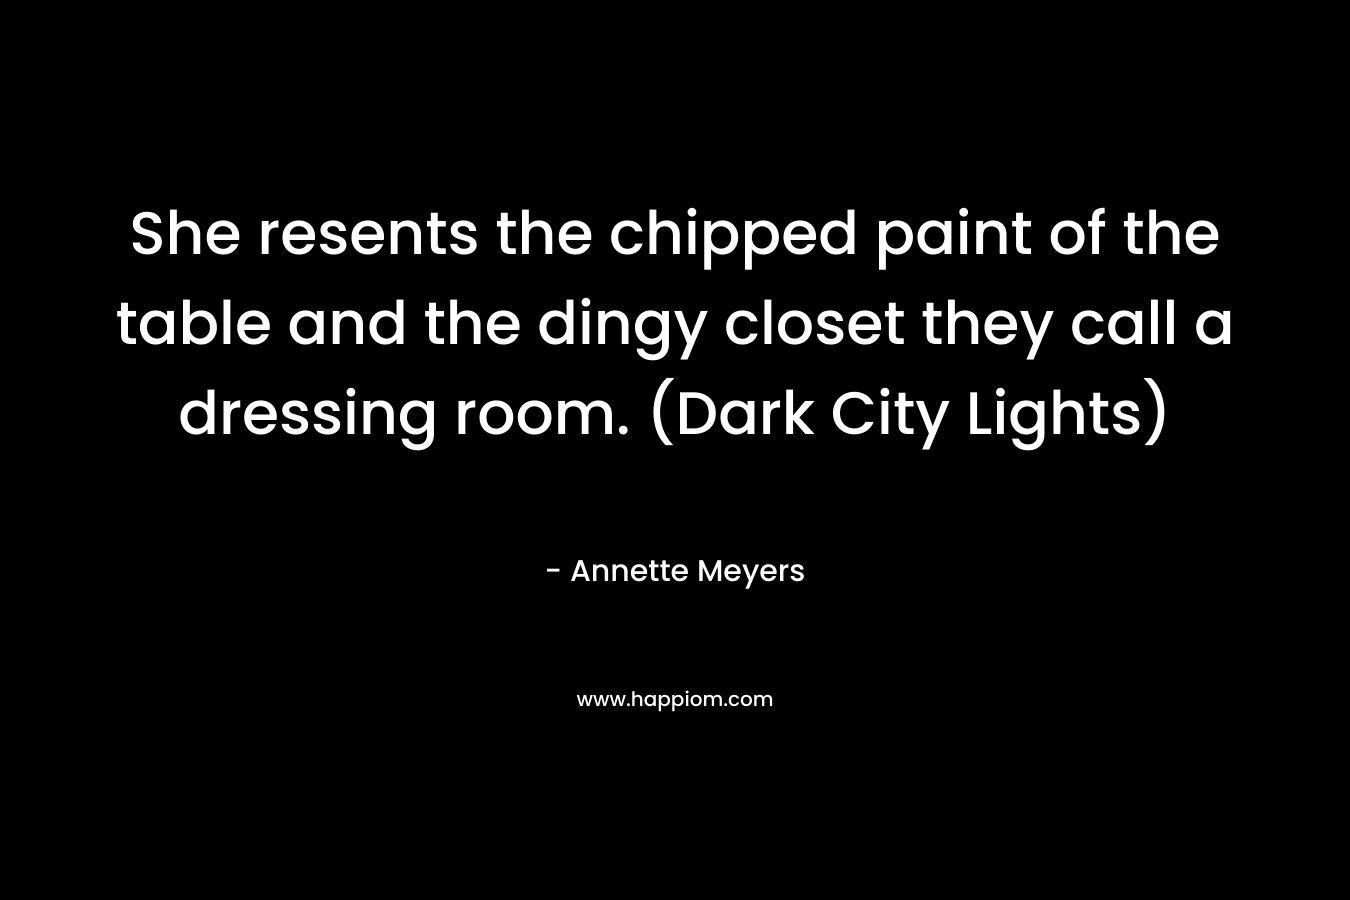 She resents the chipped paint of the table and the dingy closet they call a dressing room. (Dark City Lights) – Annette Meyers